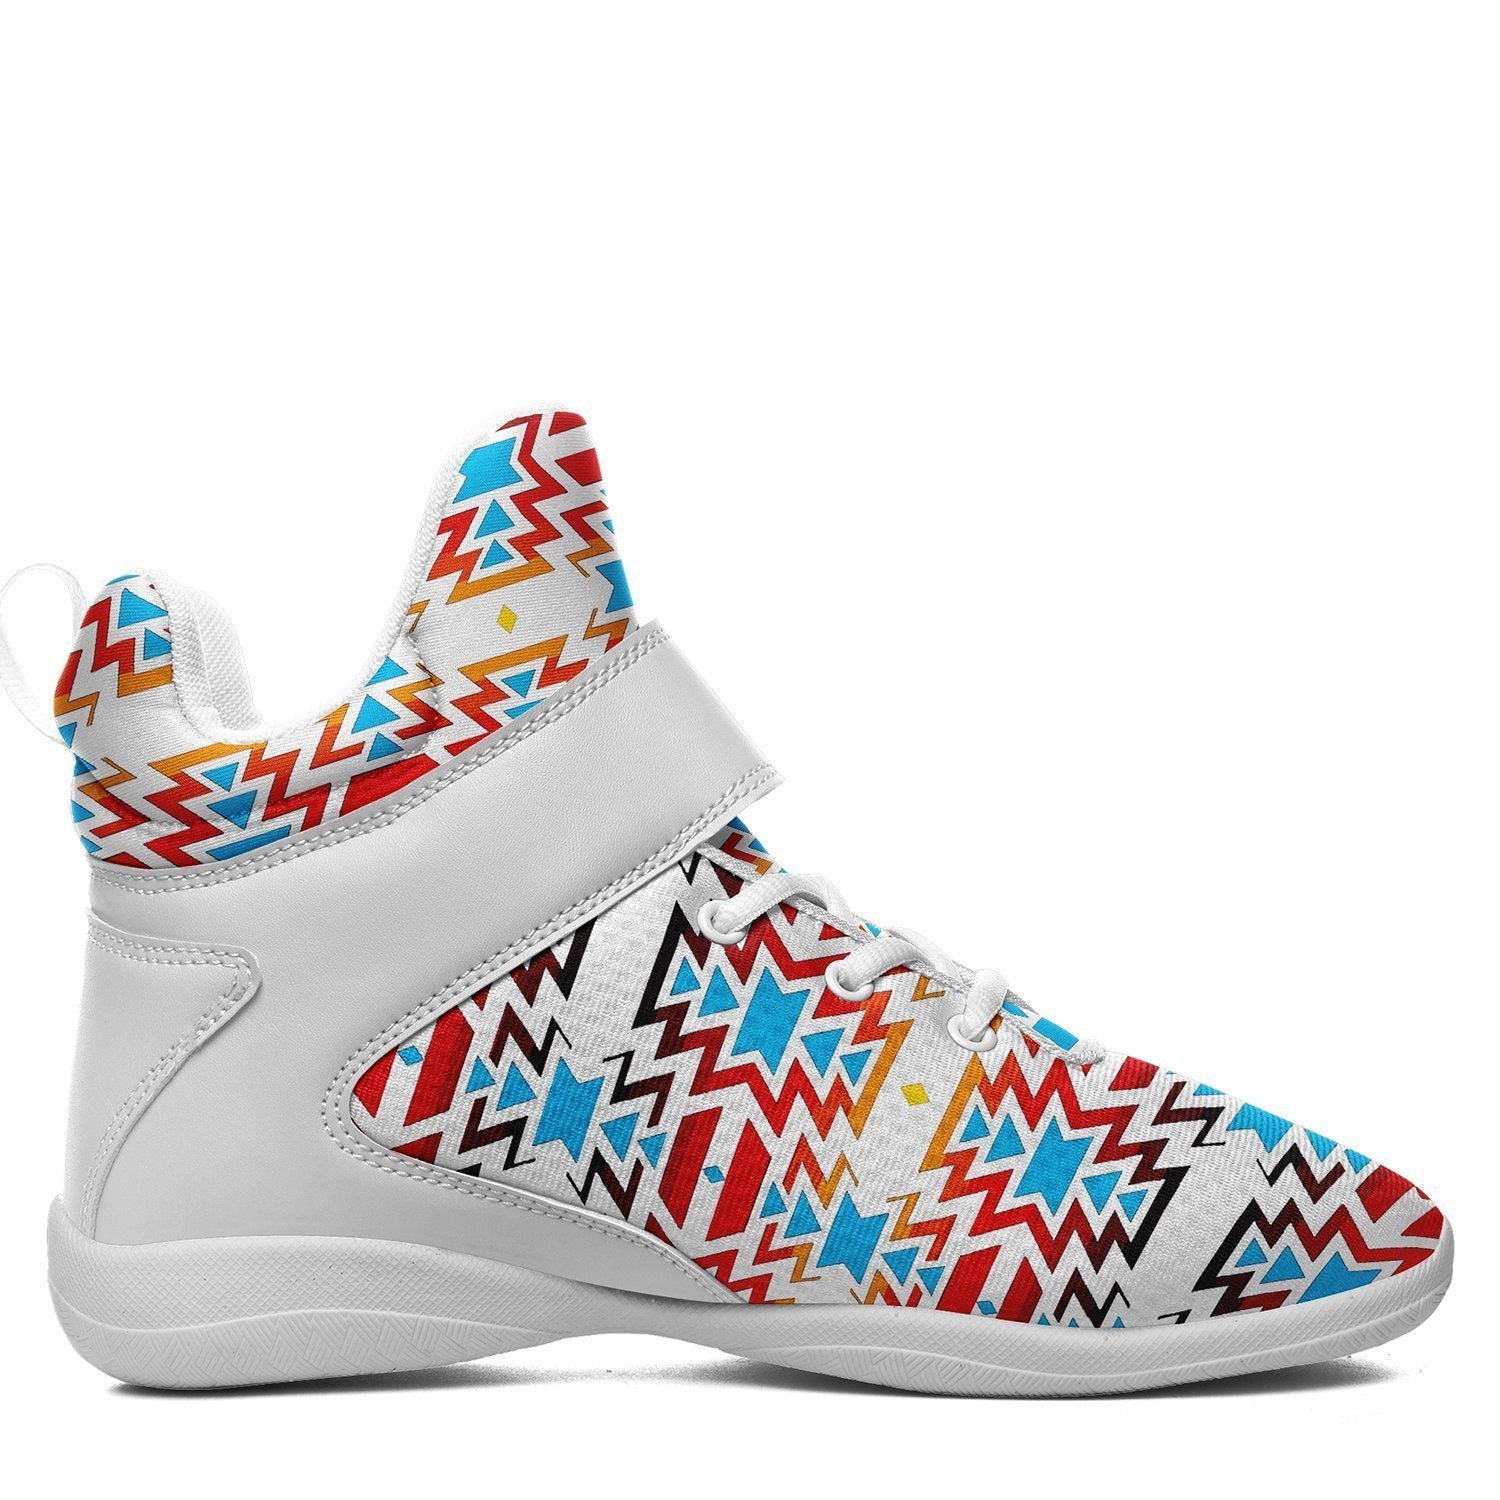 Fire Colors and Sky Ipottaa Basketball / Sport High Top Shoes - White Sole 49 Dzine 